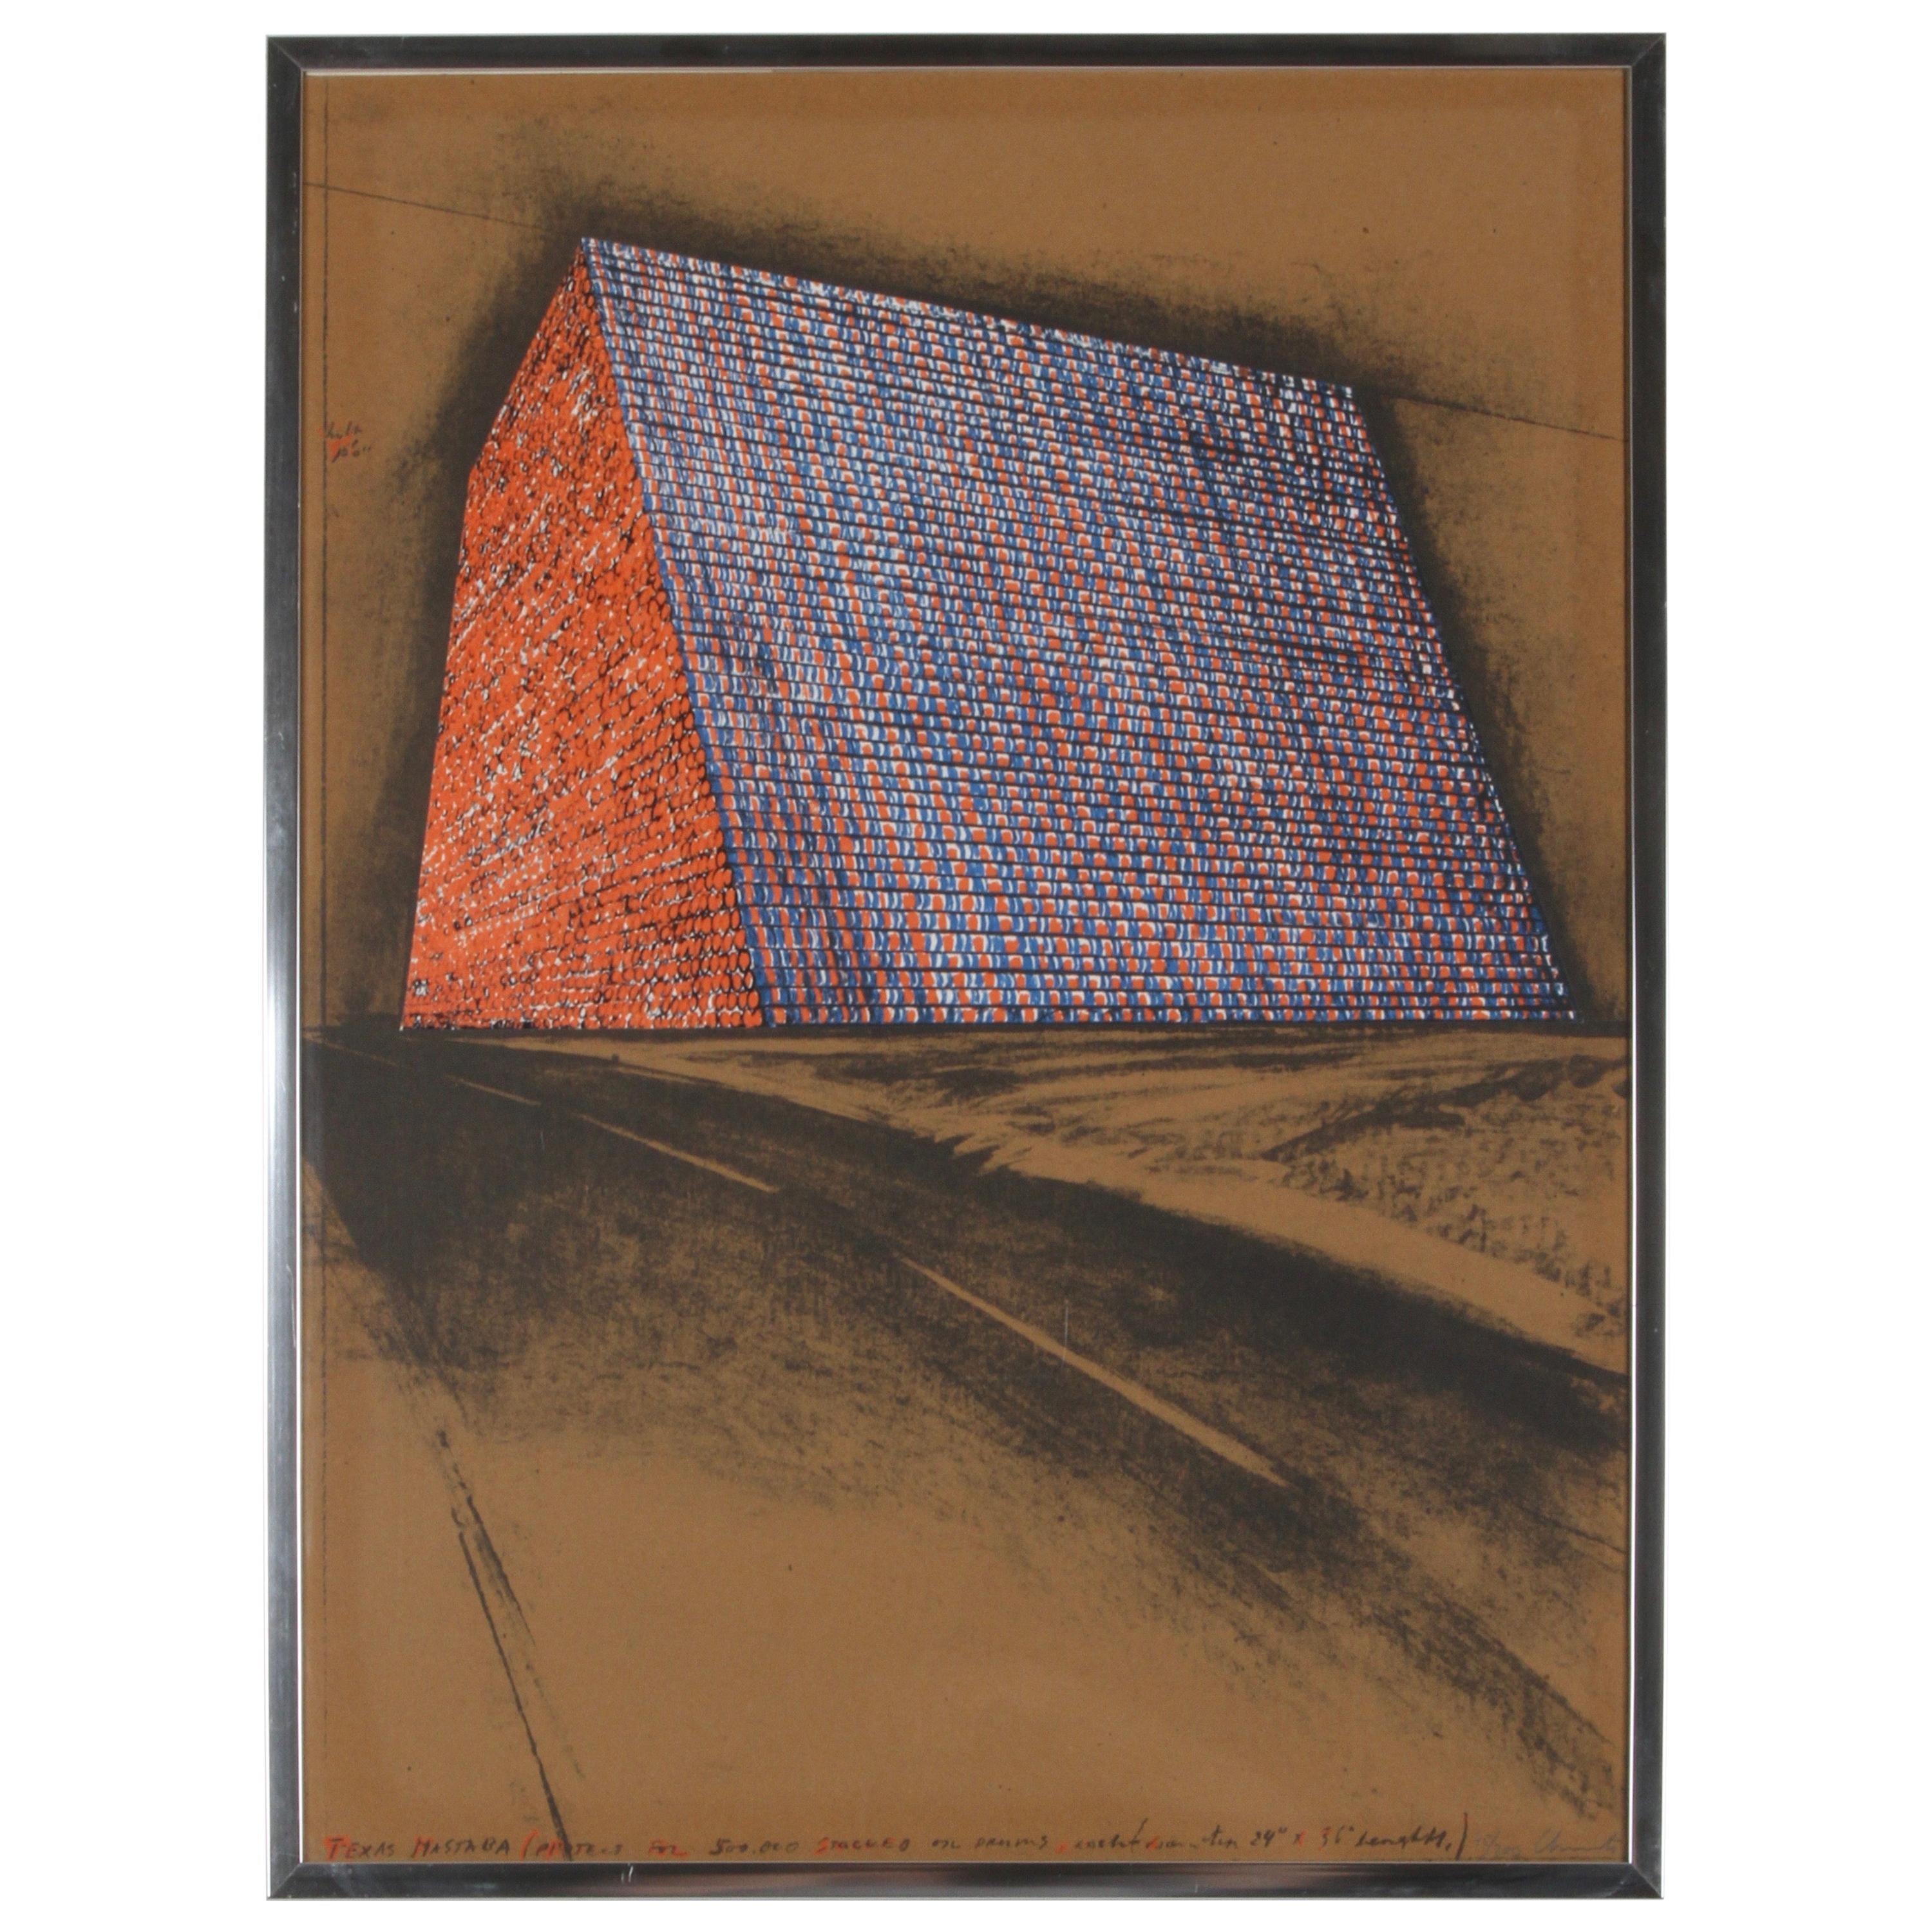 Christo, Texas Mastra Project for 500,000 Stacked Oil Drums, Signed Lithograph